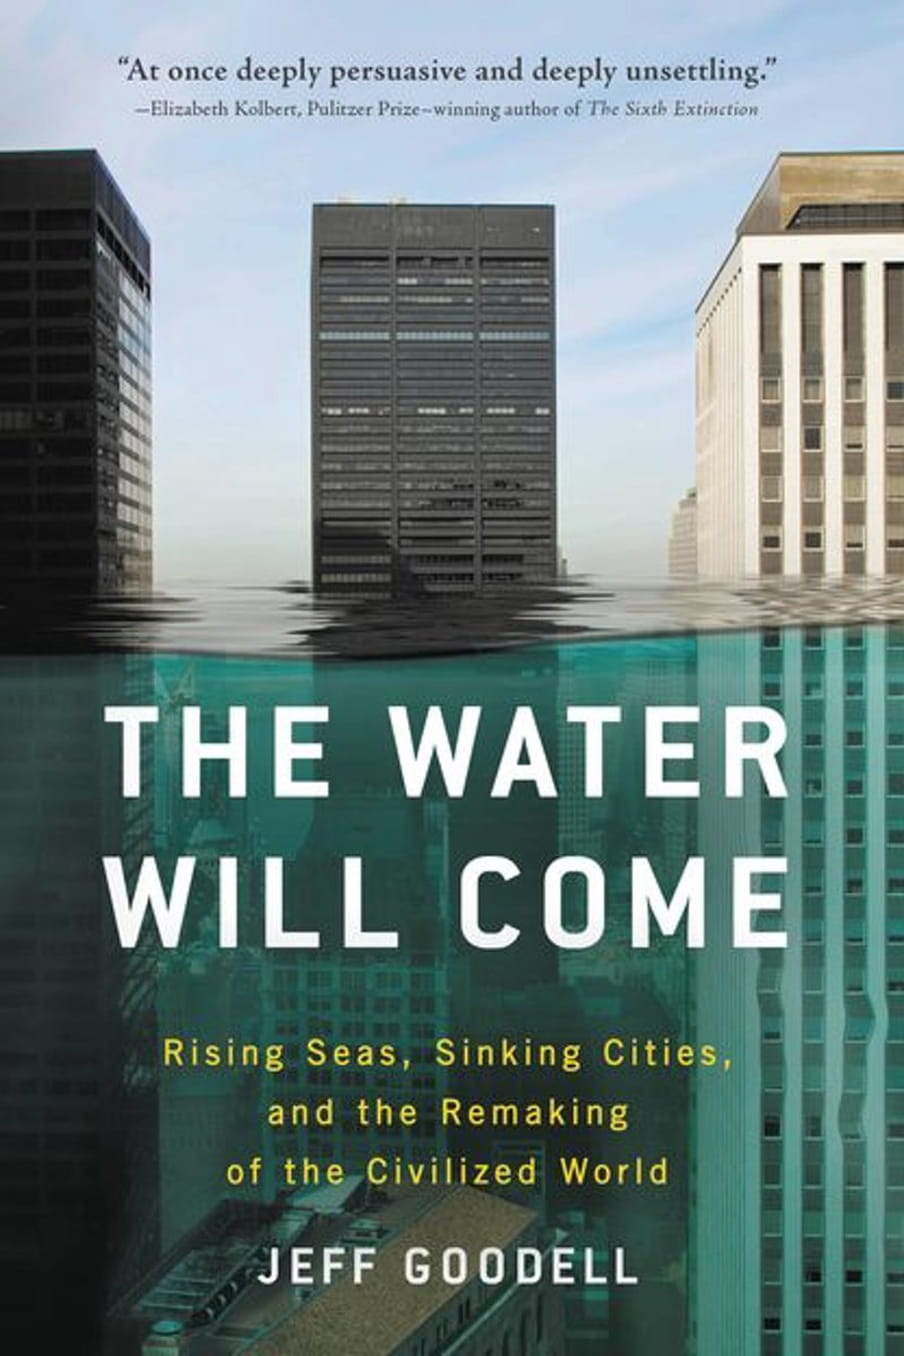 Book cover of ‘The Water Will Come’ depicting a city half under water